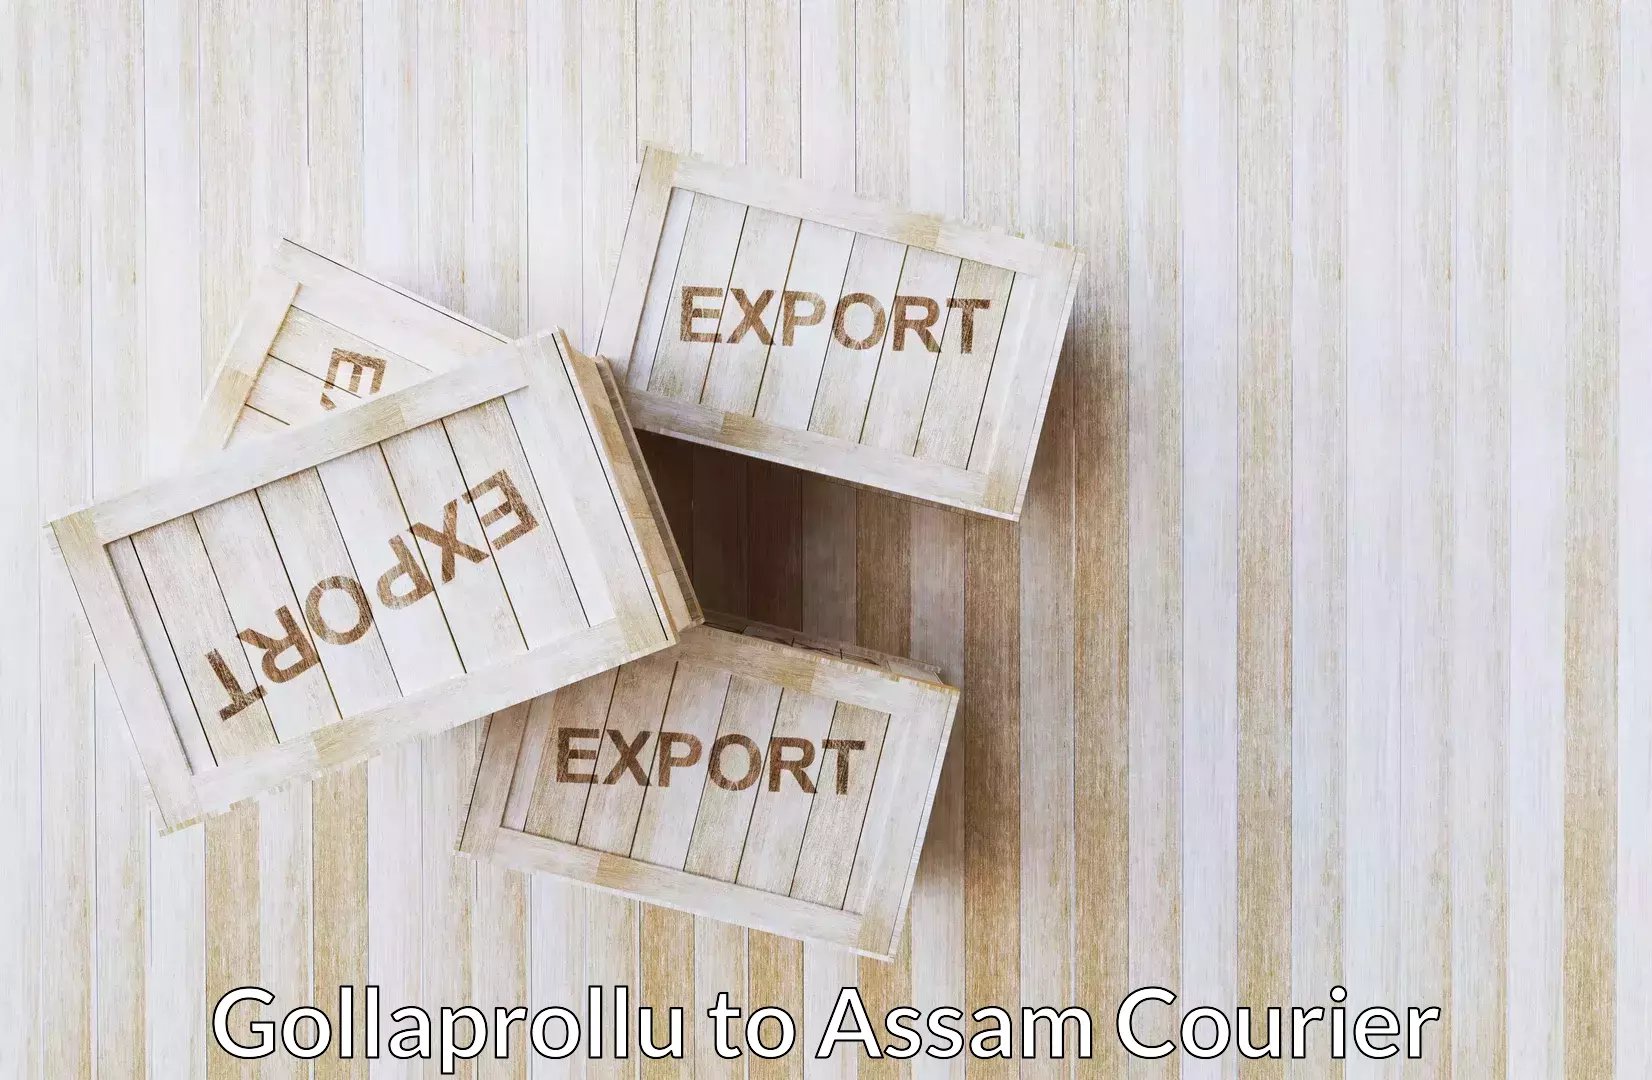 Smooth relocation services Gollaprollu to Guwahati